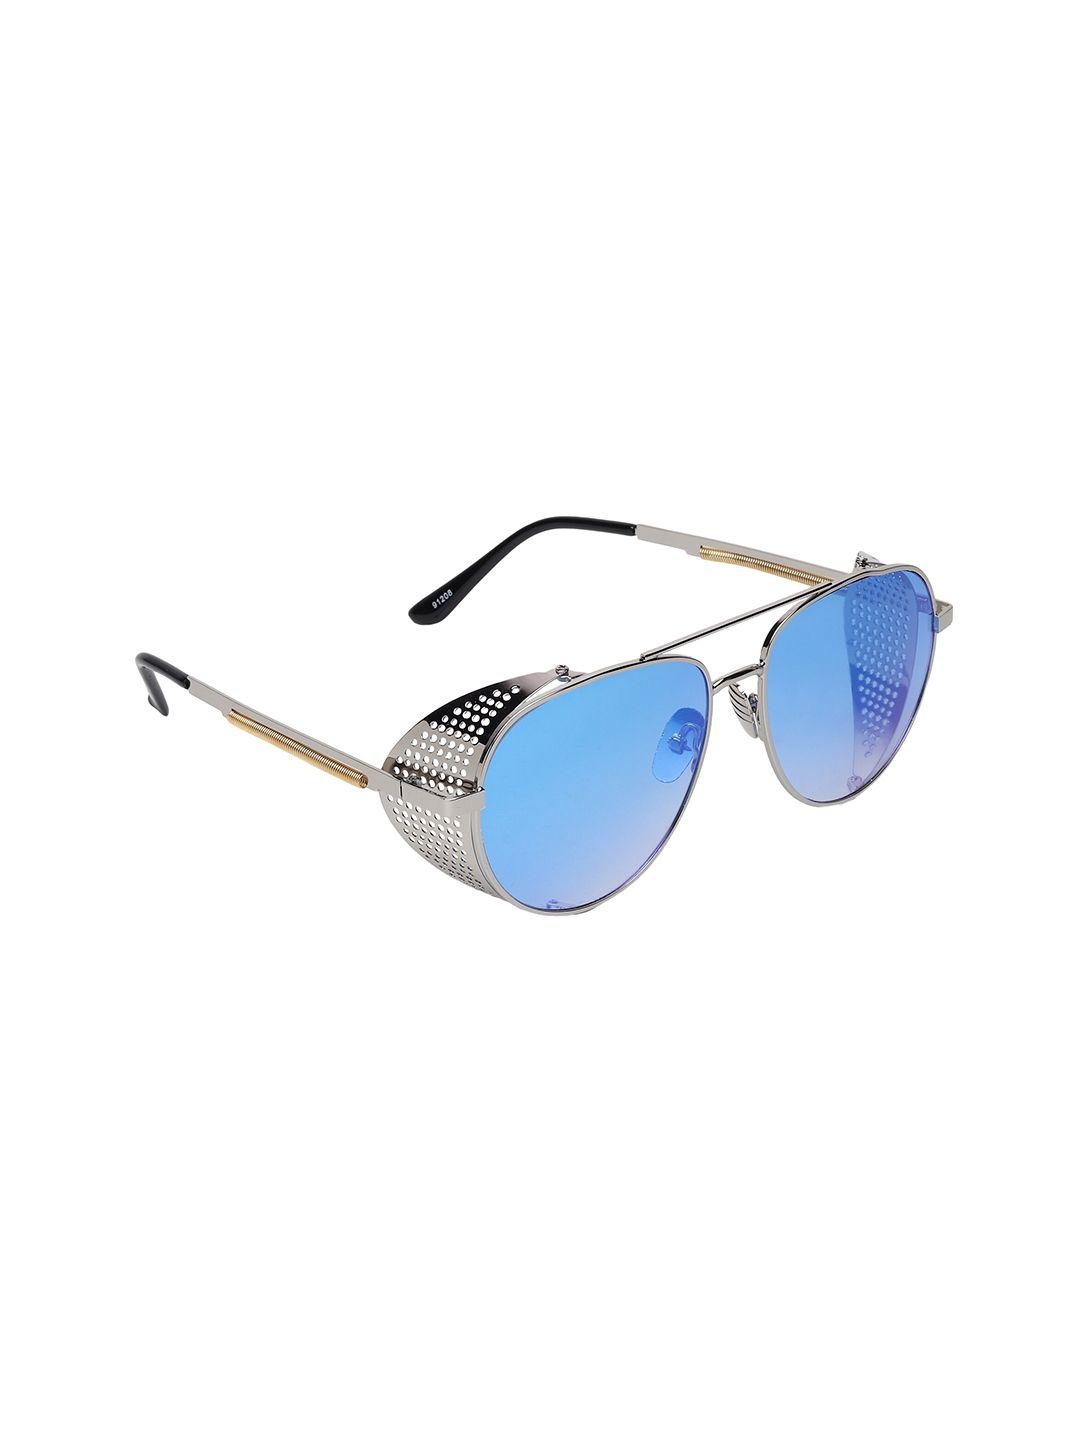 swiss design mirrored lens & oval sunglasses with uv protected lens sdsg-91208-06